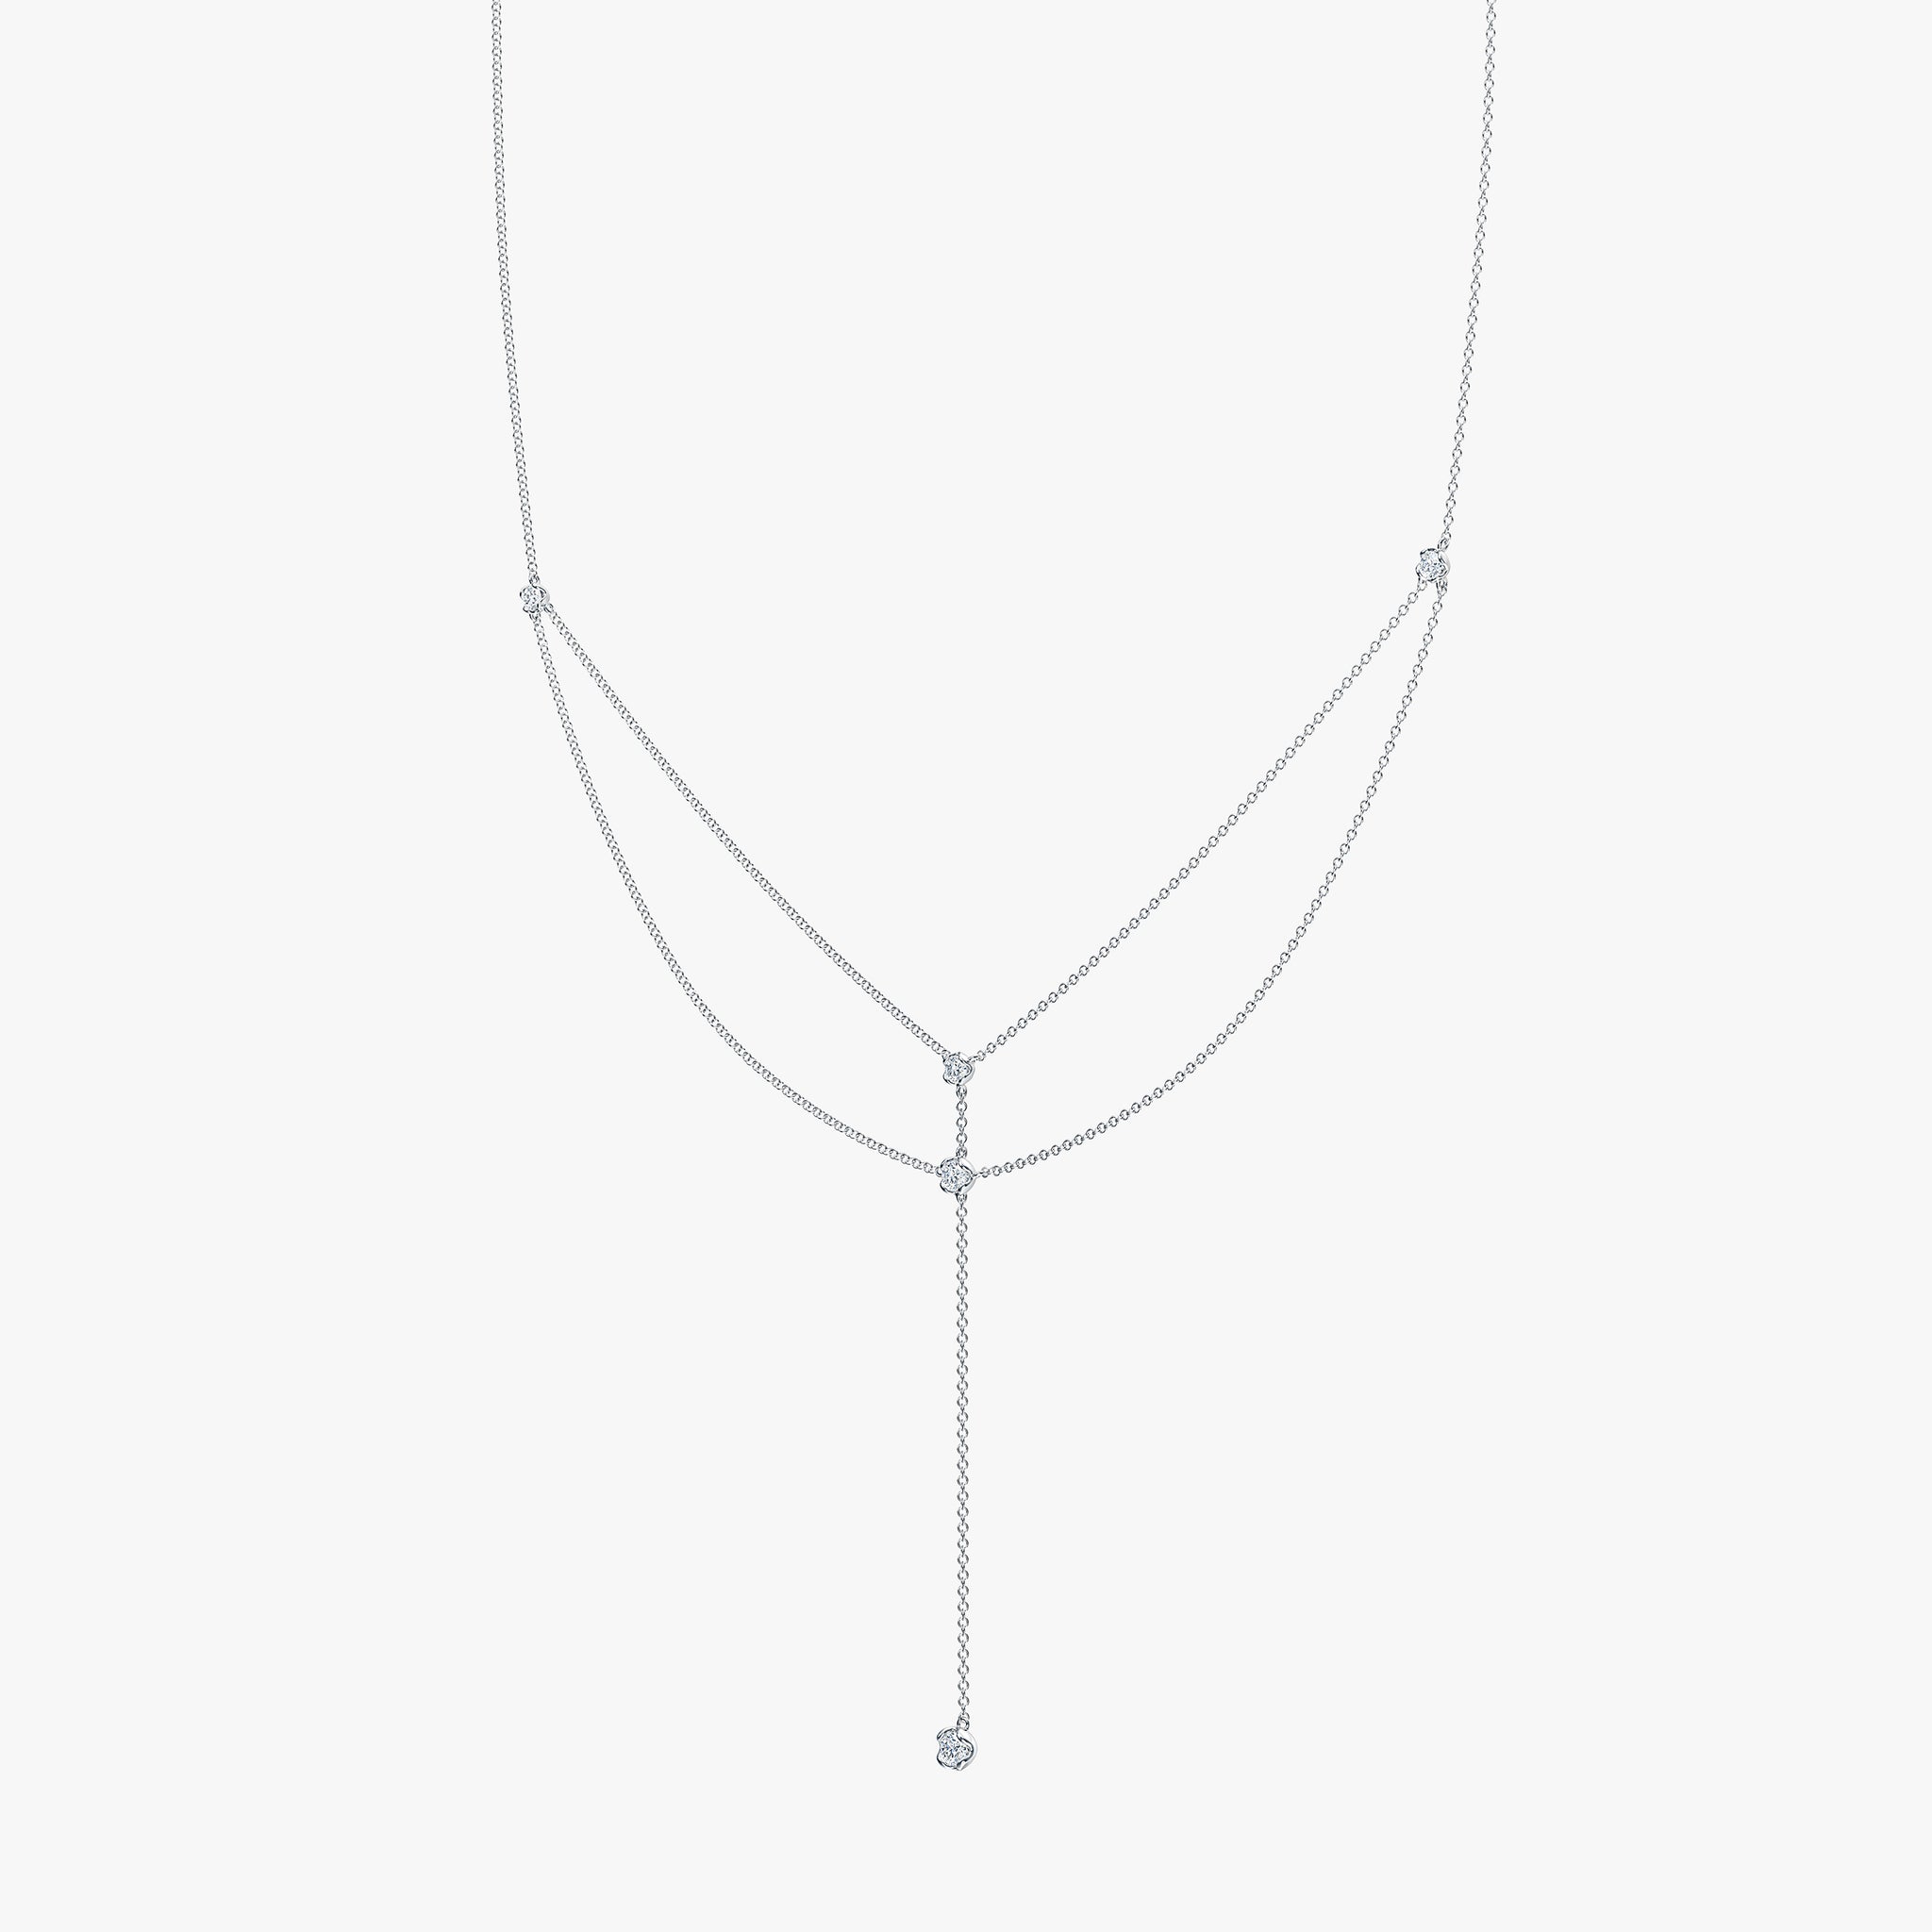 J'EVAR 14KT White Gold Double-Layered Lariat ALTR Lab Grown Diamond Necklace Perspective View